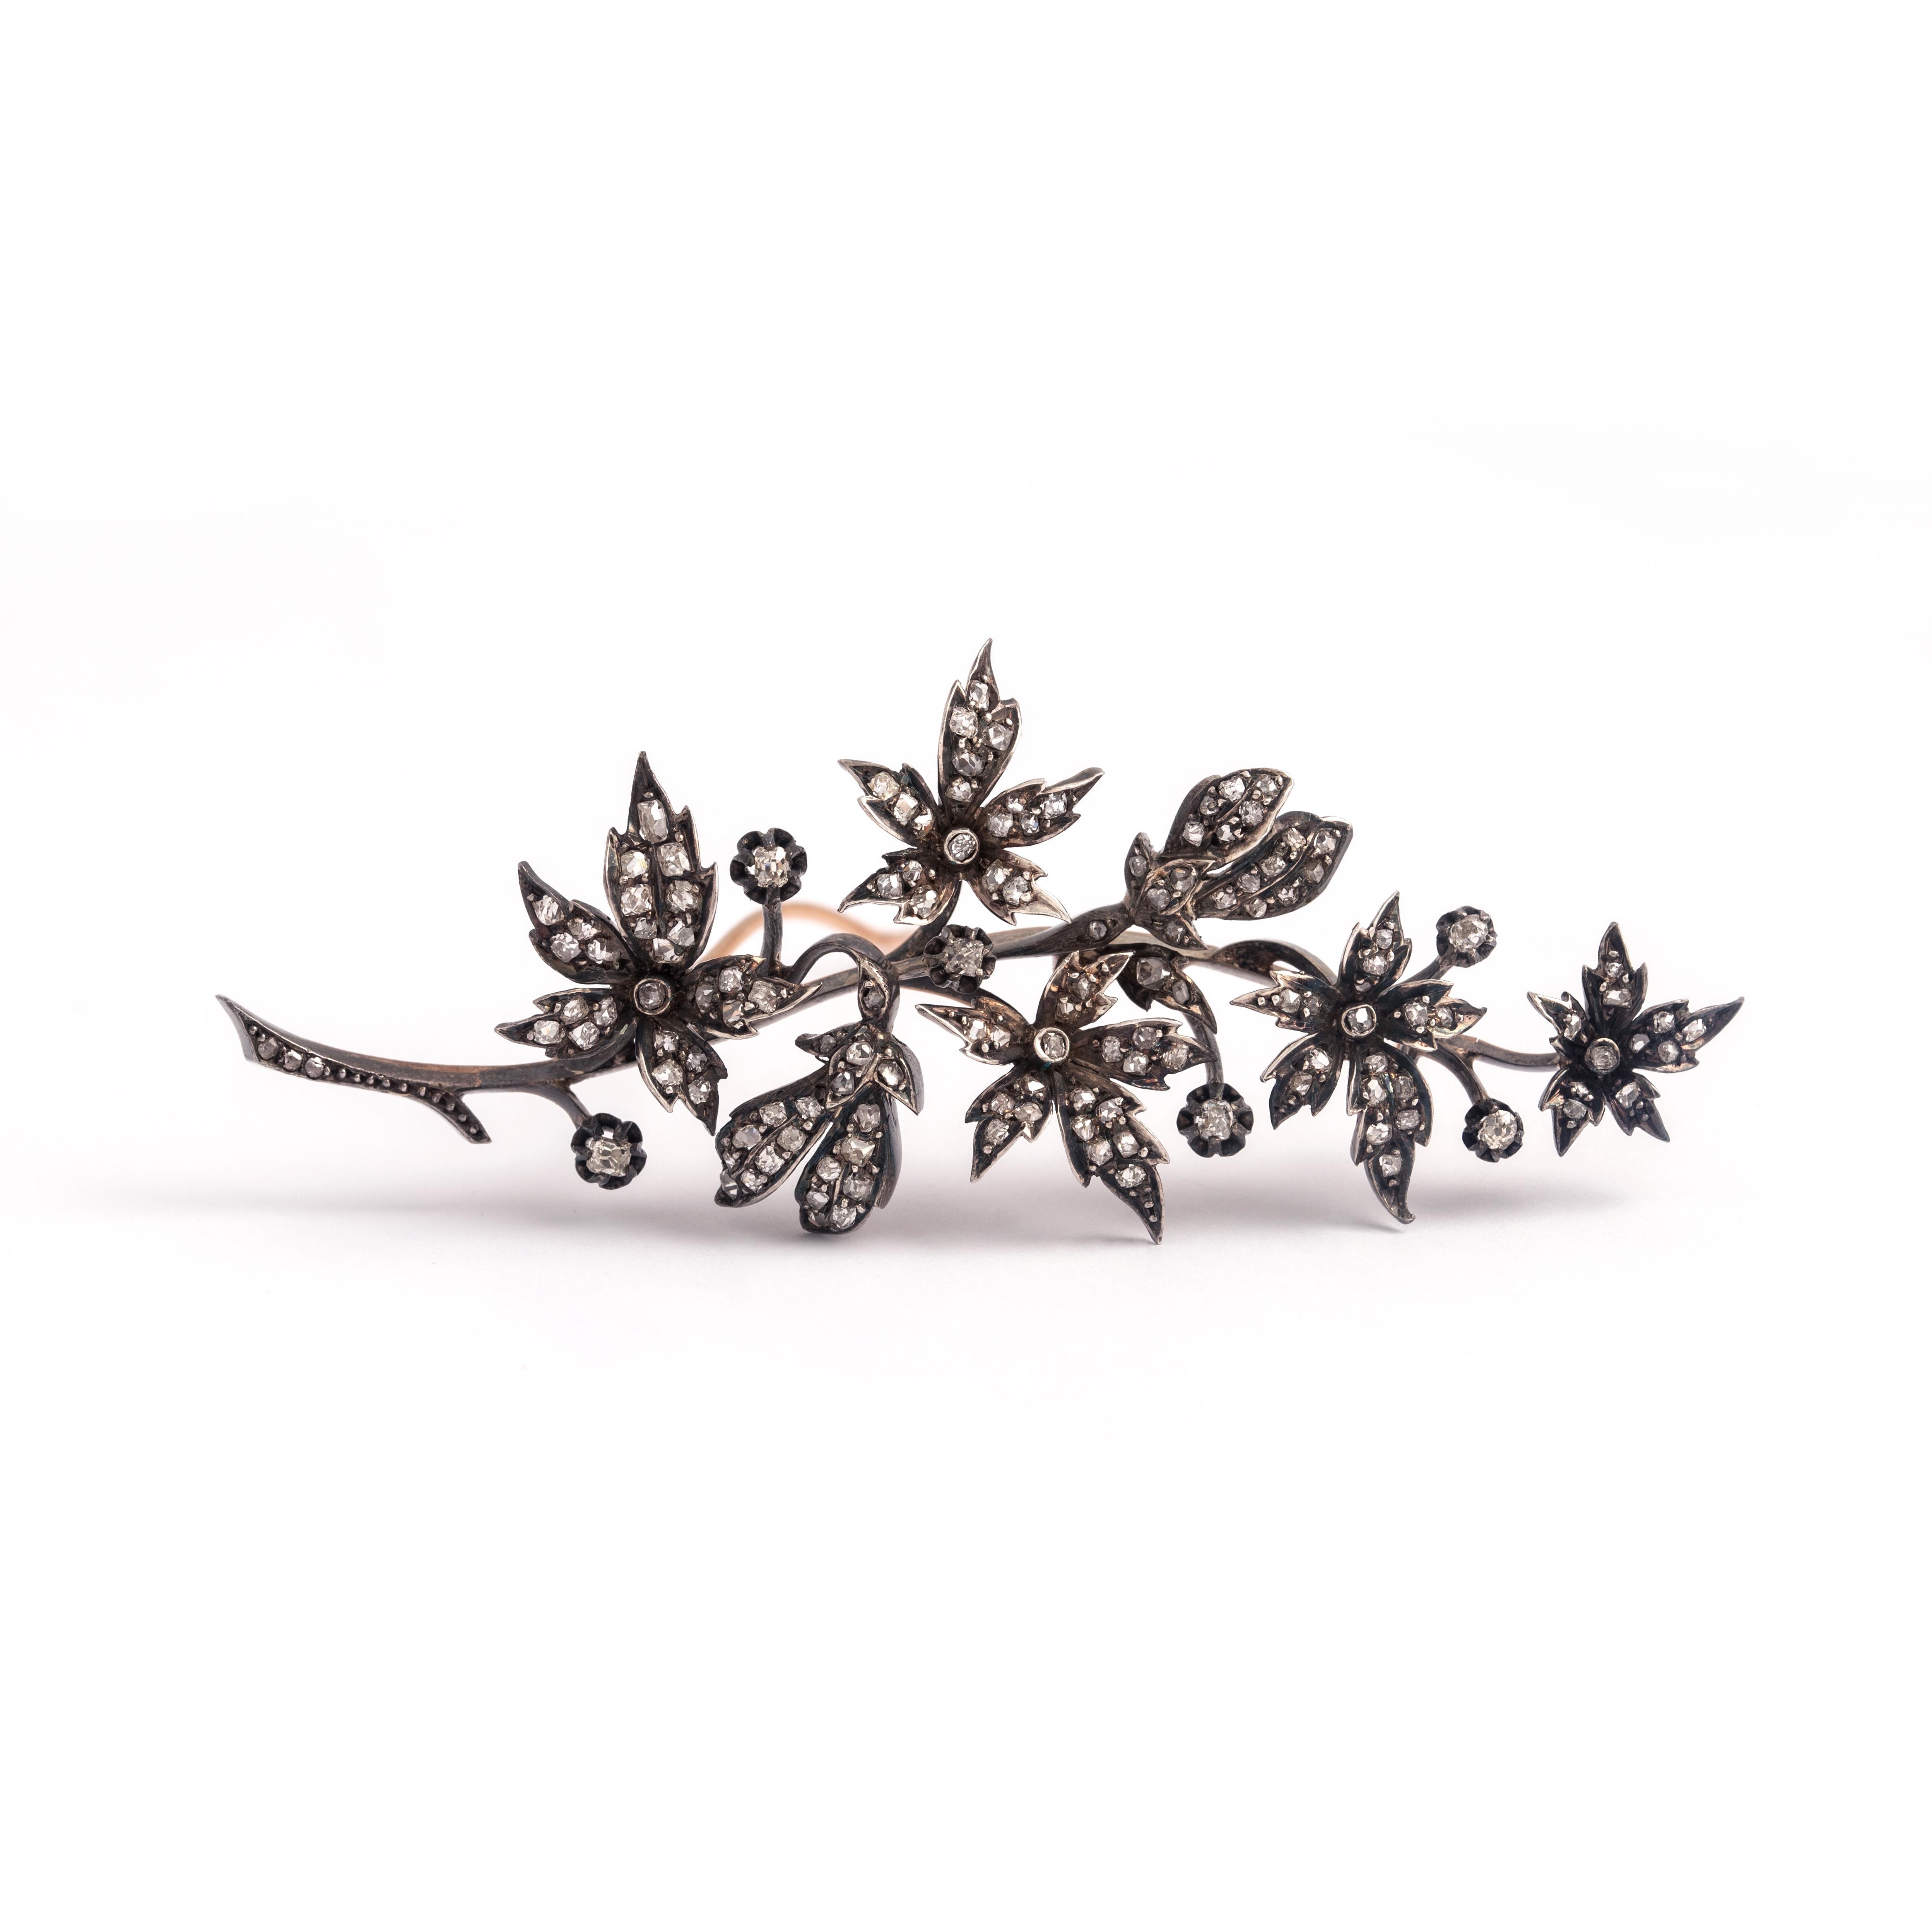 Taille rose Mellerio Borgnis French Antique Diamond Silver Gold Flower Brooch 19e siècle en vente